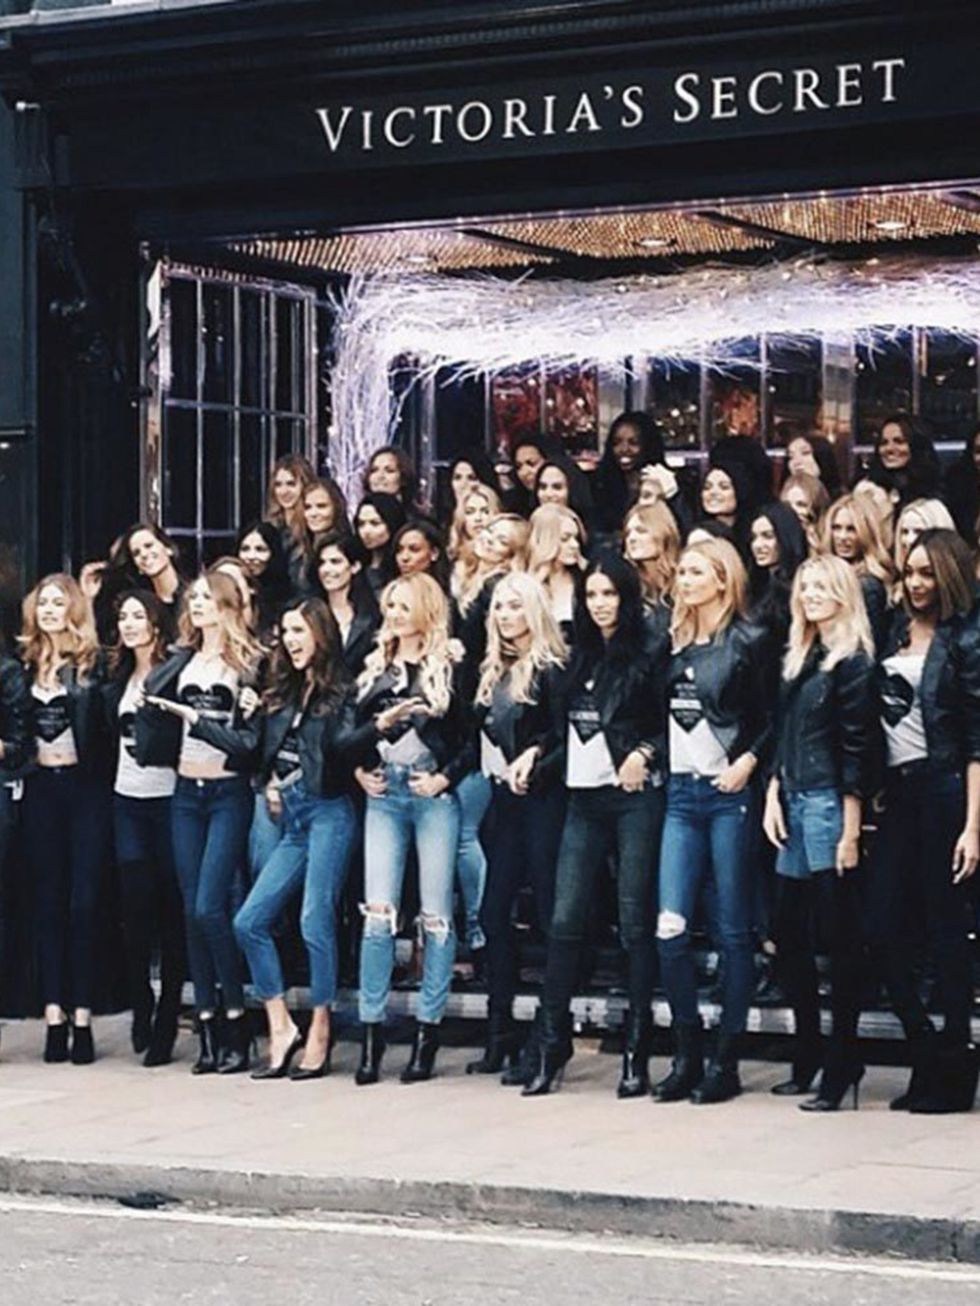 Karlie Kloss @karliekloss
The @VictoriasSecret Angels have landed at the New Bond Street store  #regram from @tommyton